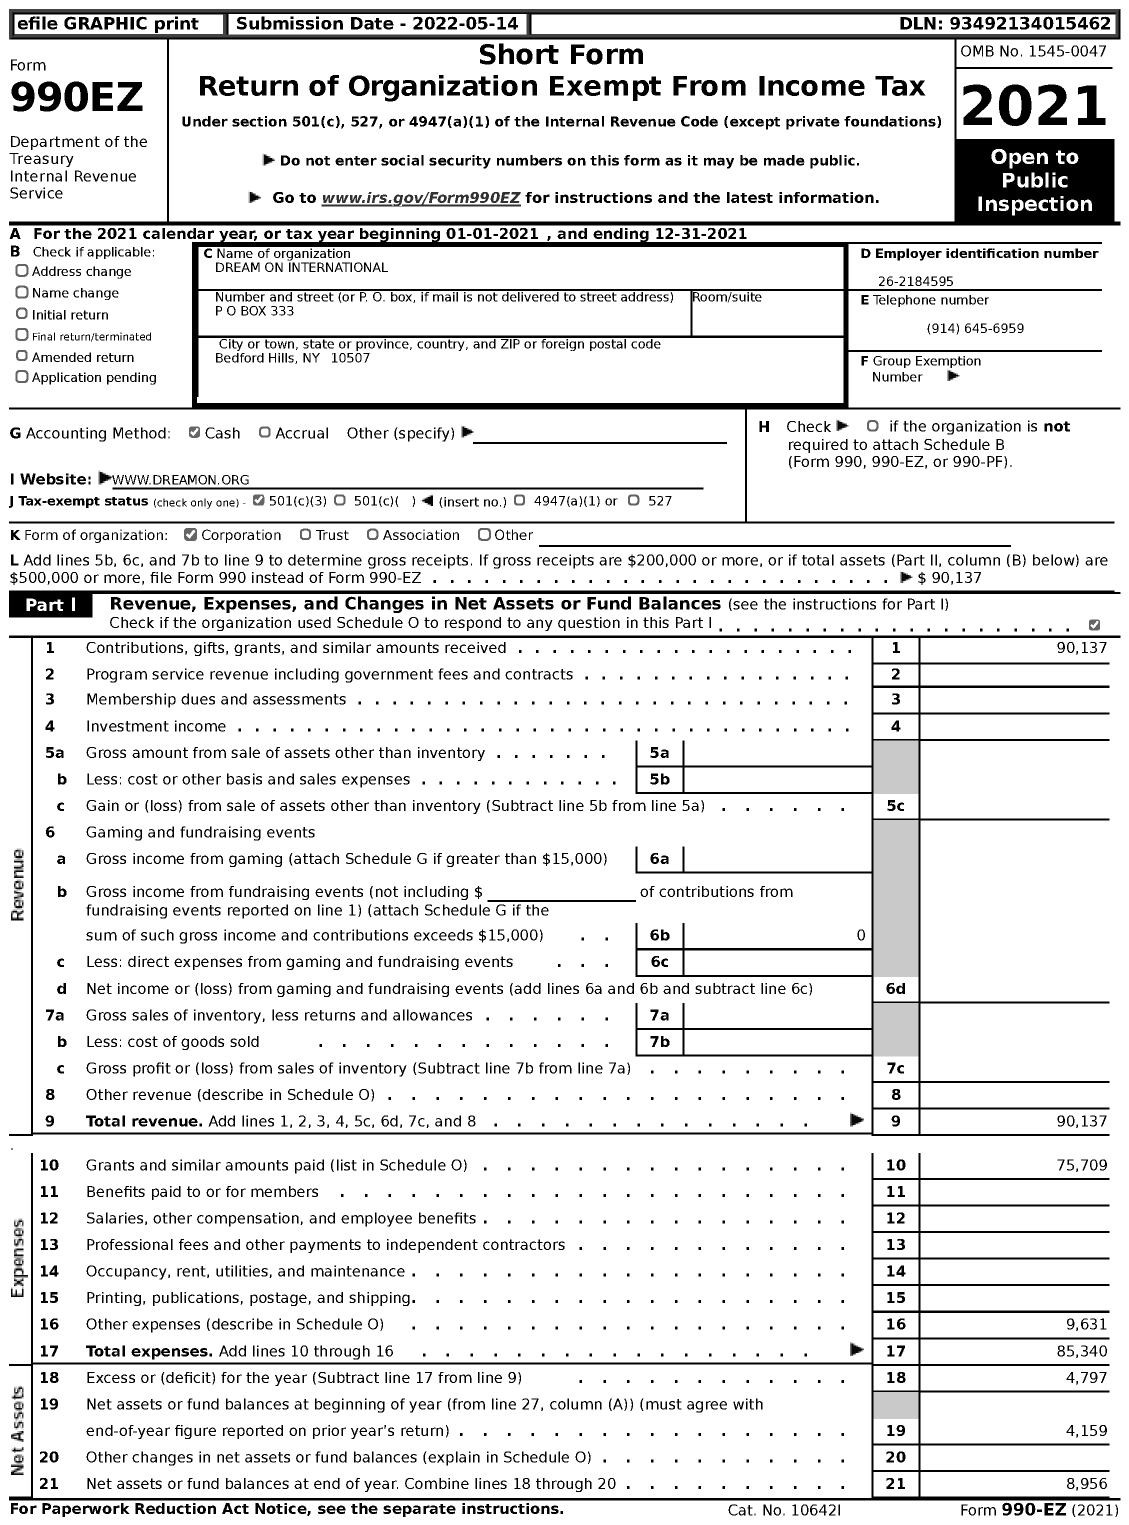 Image of first page of 2021 Form 990EZ for Dream on International